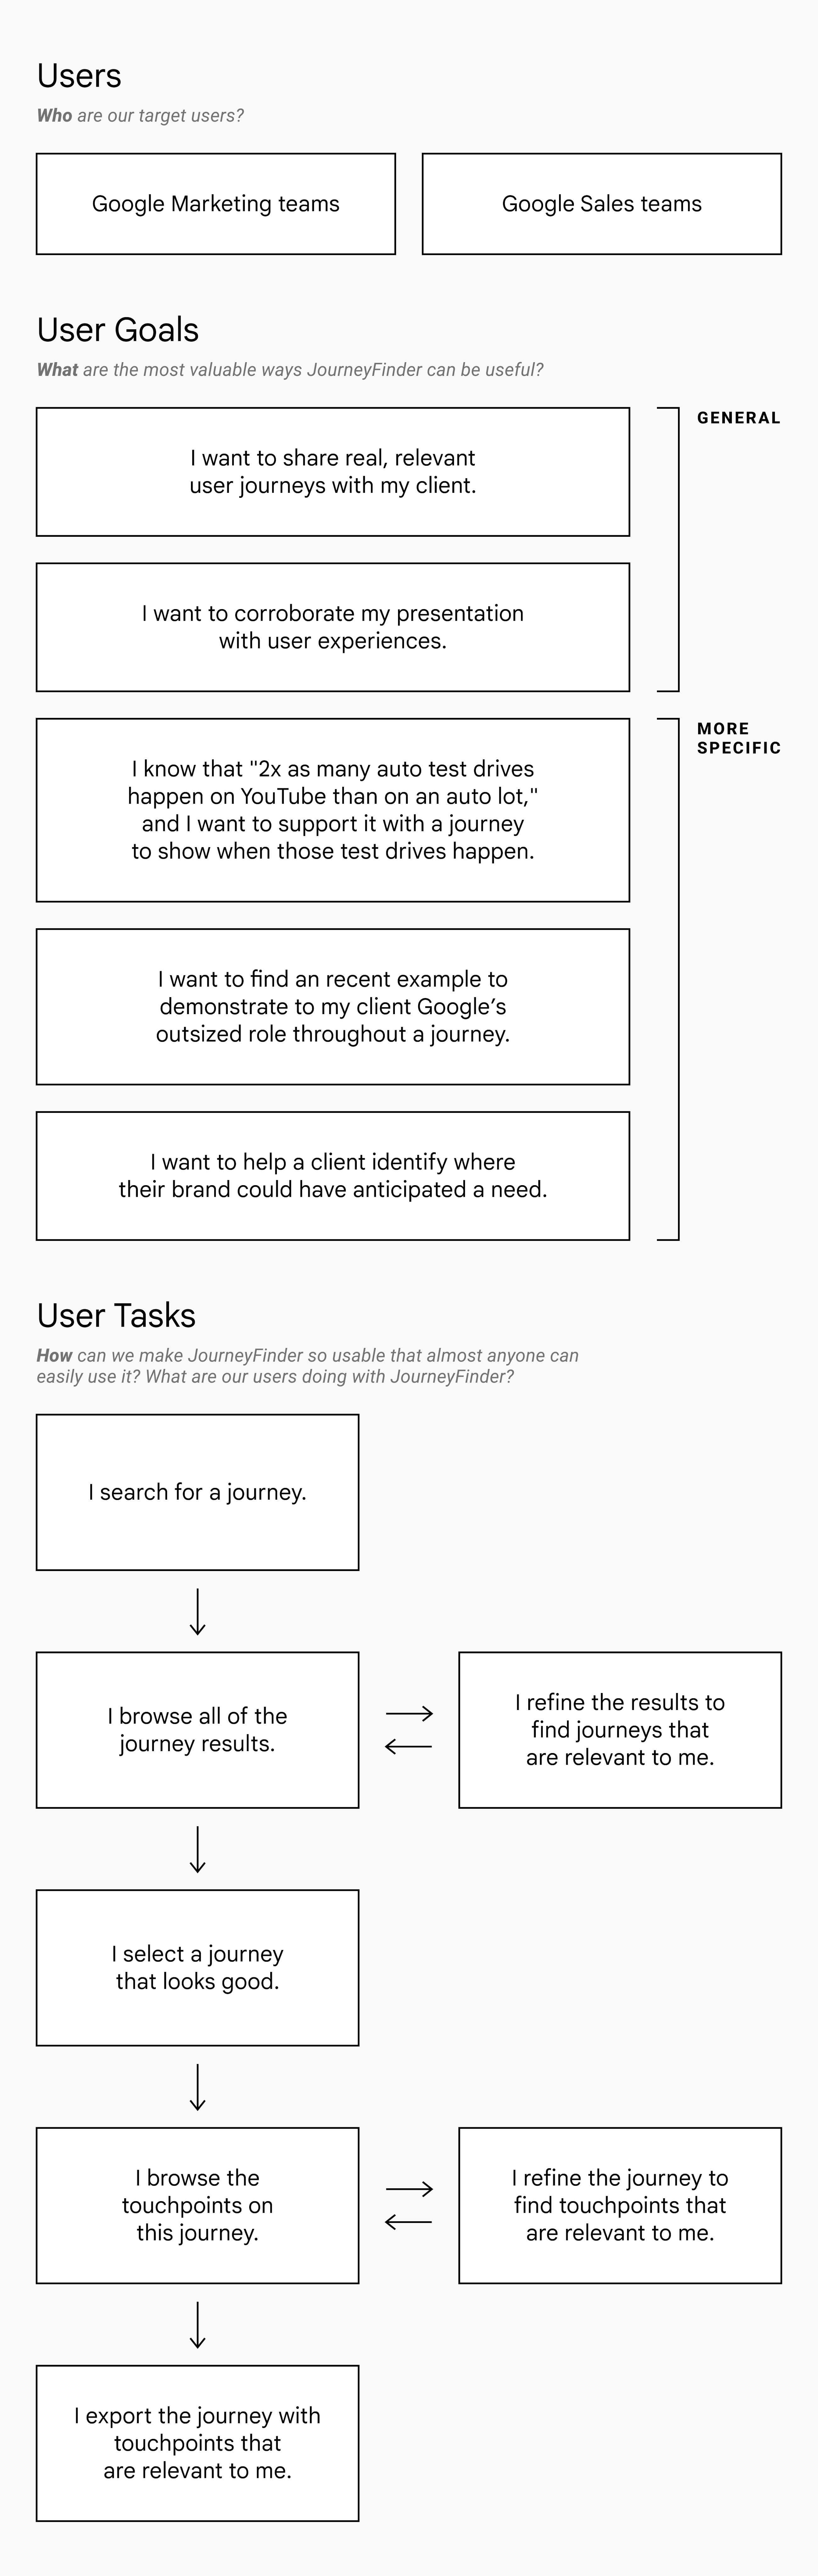 We defined our users, their critical goals, and the set of tasks to achieve those goals.